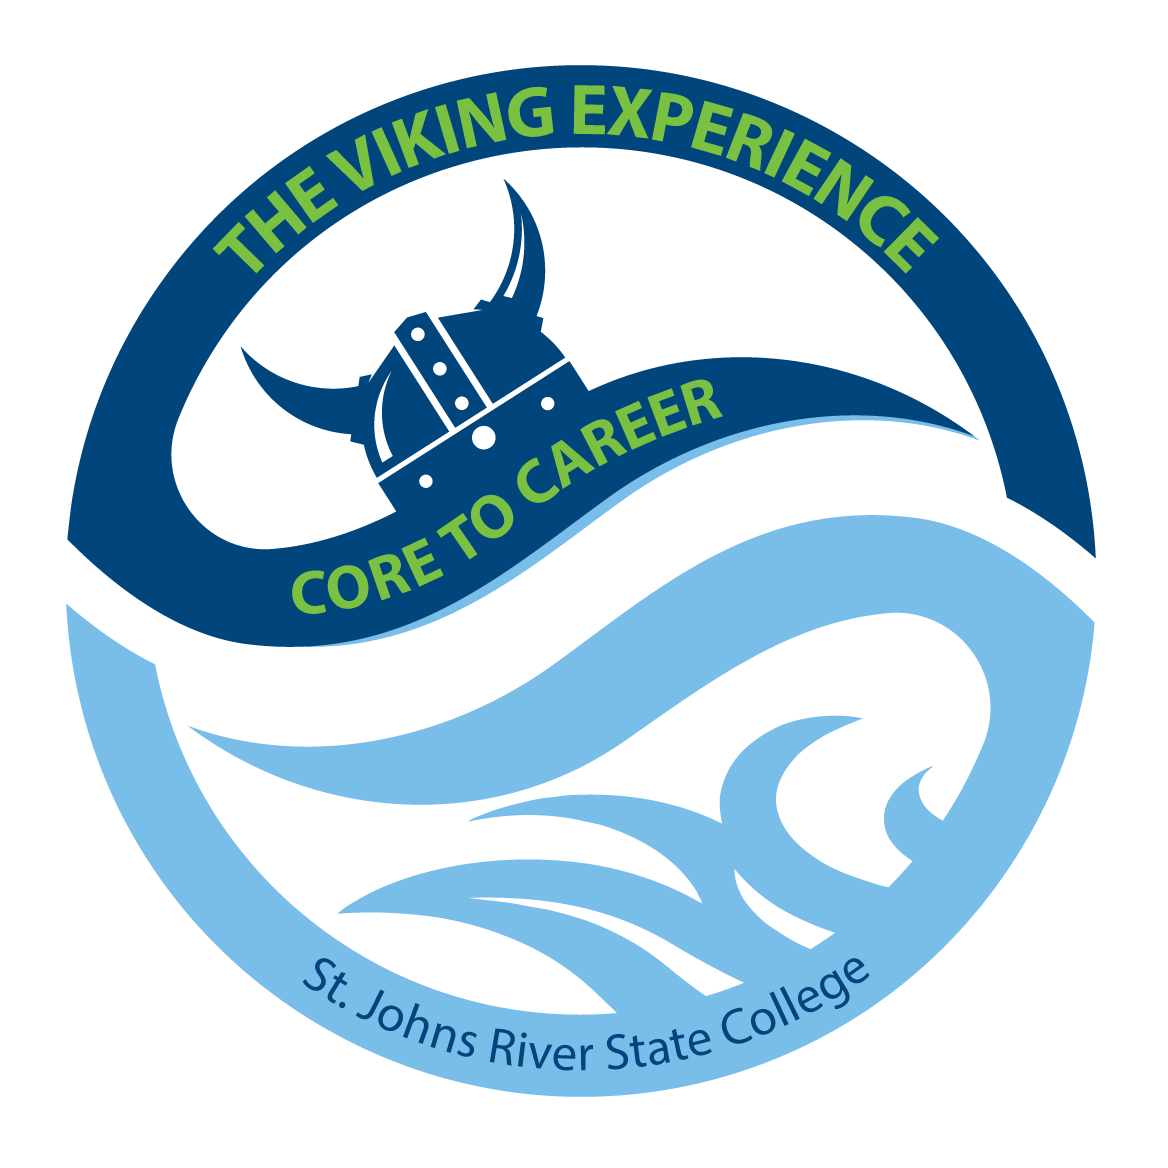 The Viking Experience: Core to Career logo